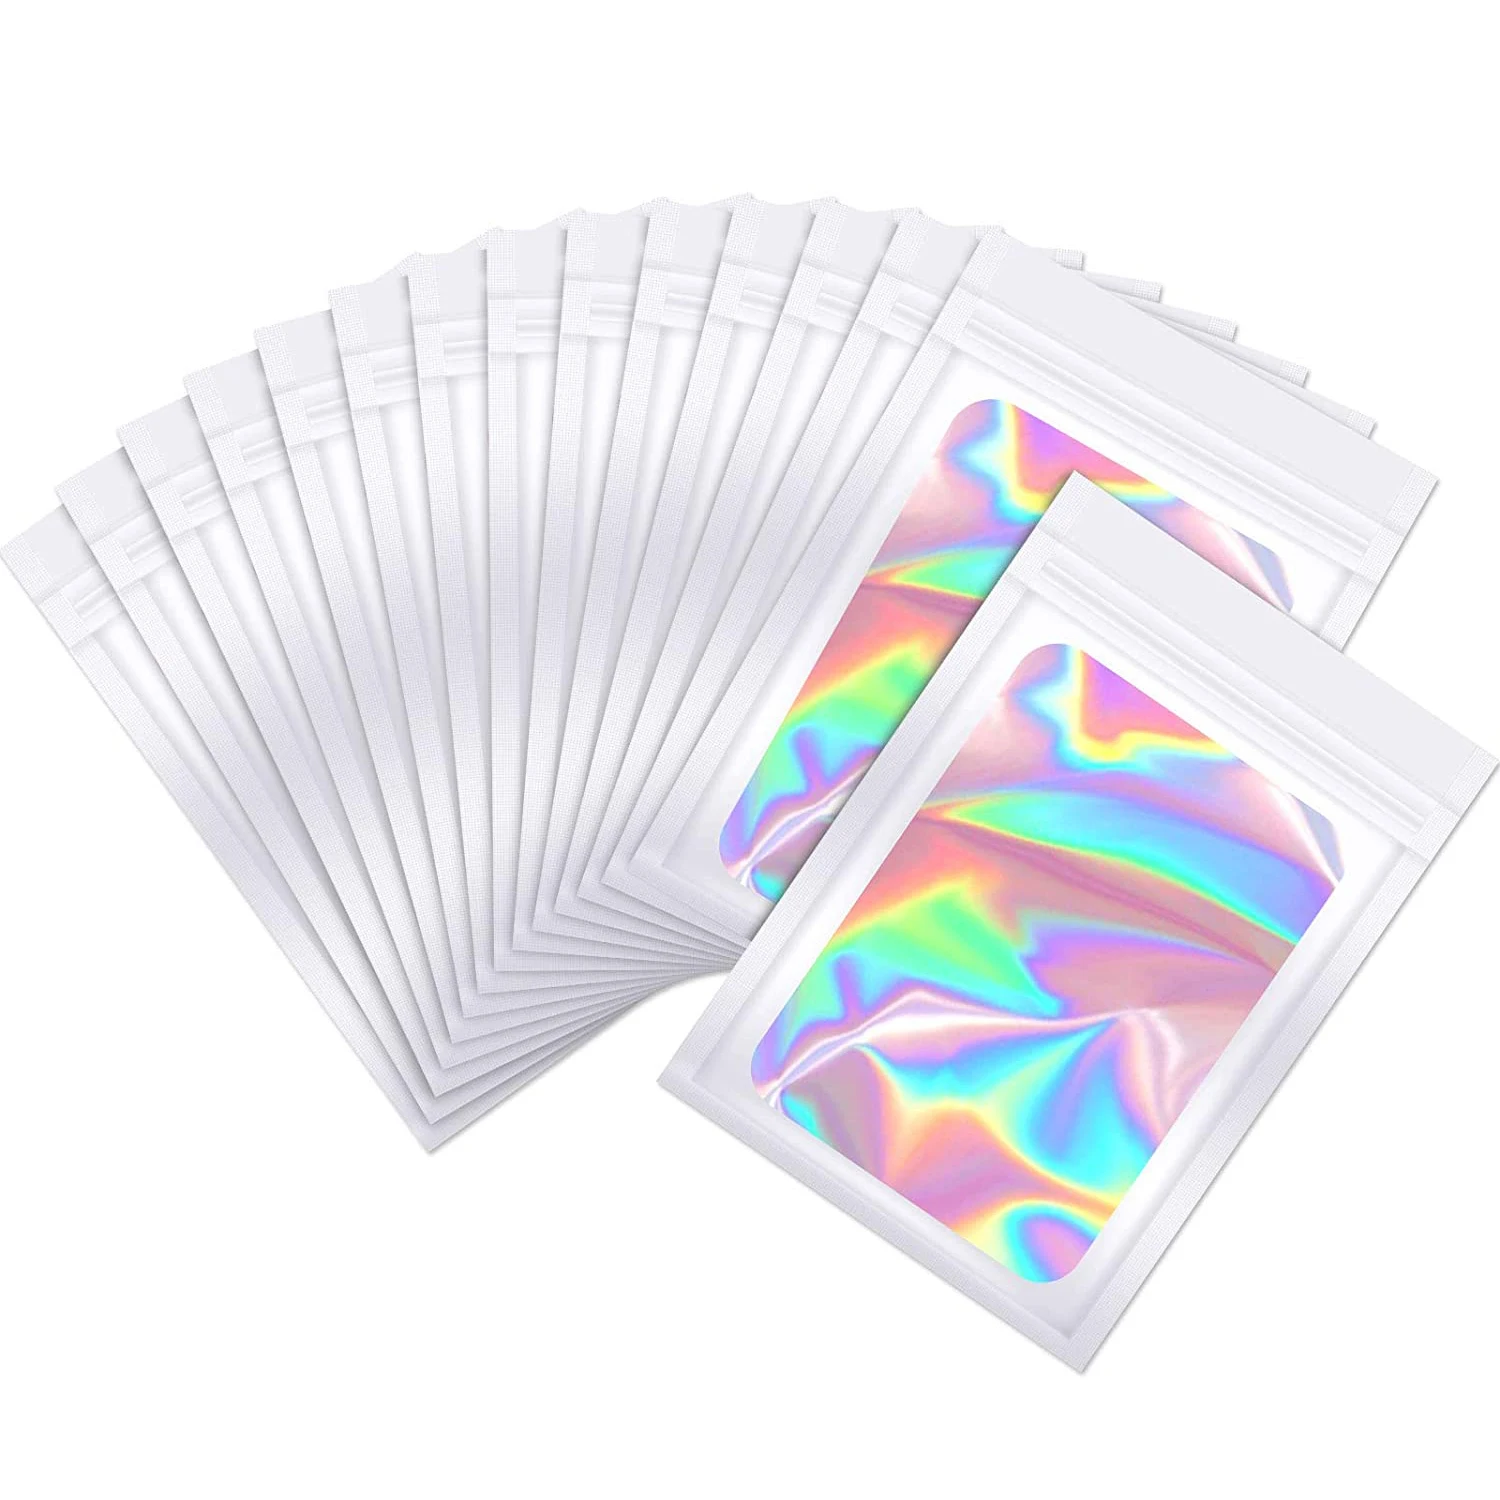 100 Pc Smell Proof Mylar Bags Resealable Odor Proof Bags Holographic Packaging Pouch Bag With Clear Window For Food Jewelry